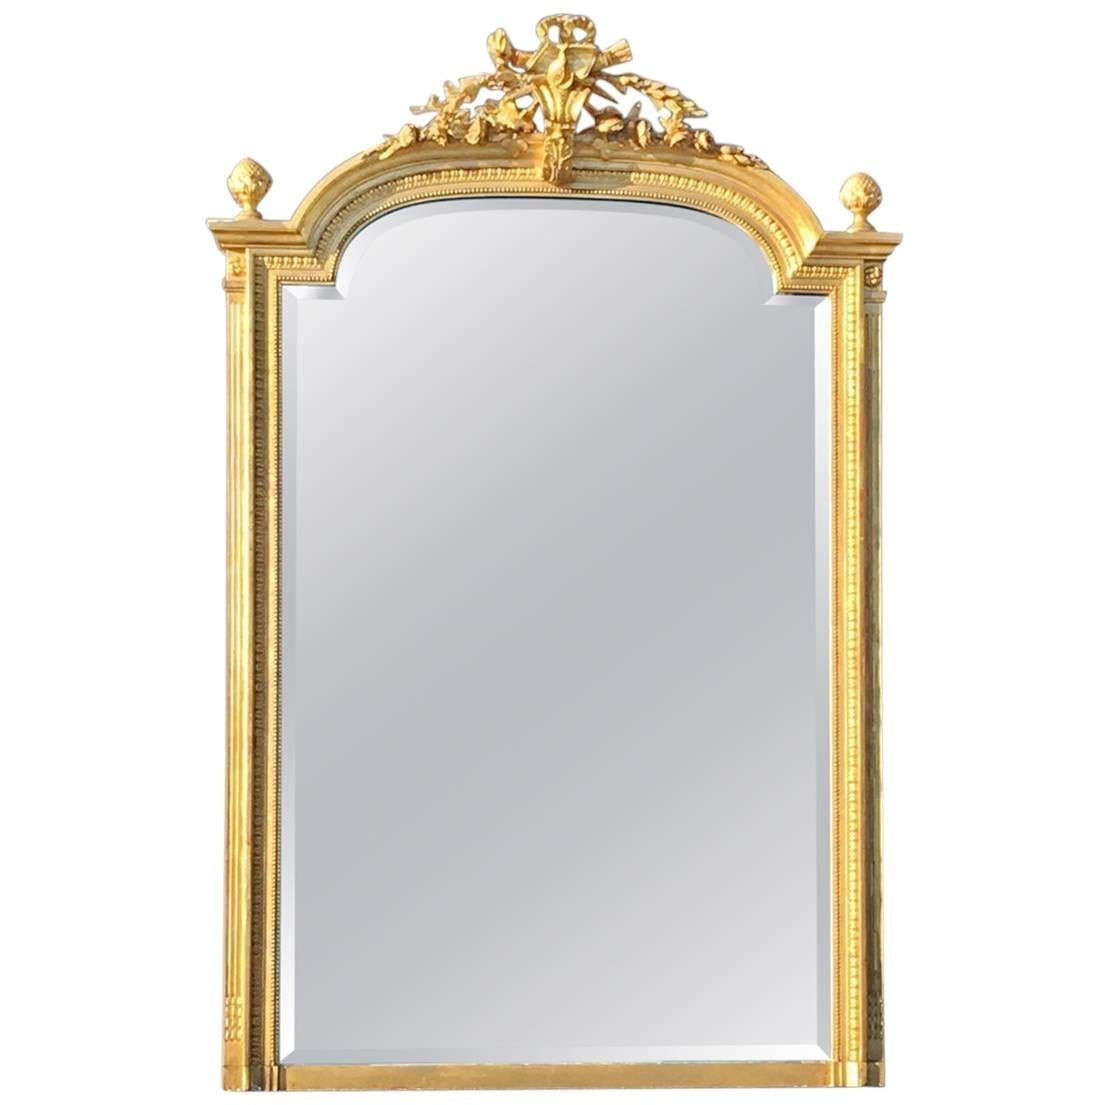 19th Century Gilded Wall Mirror / Overmantel, French, circa 1890